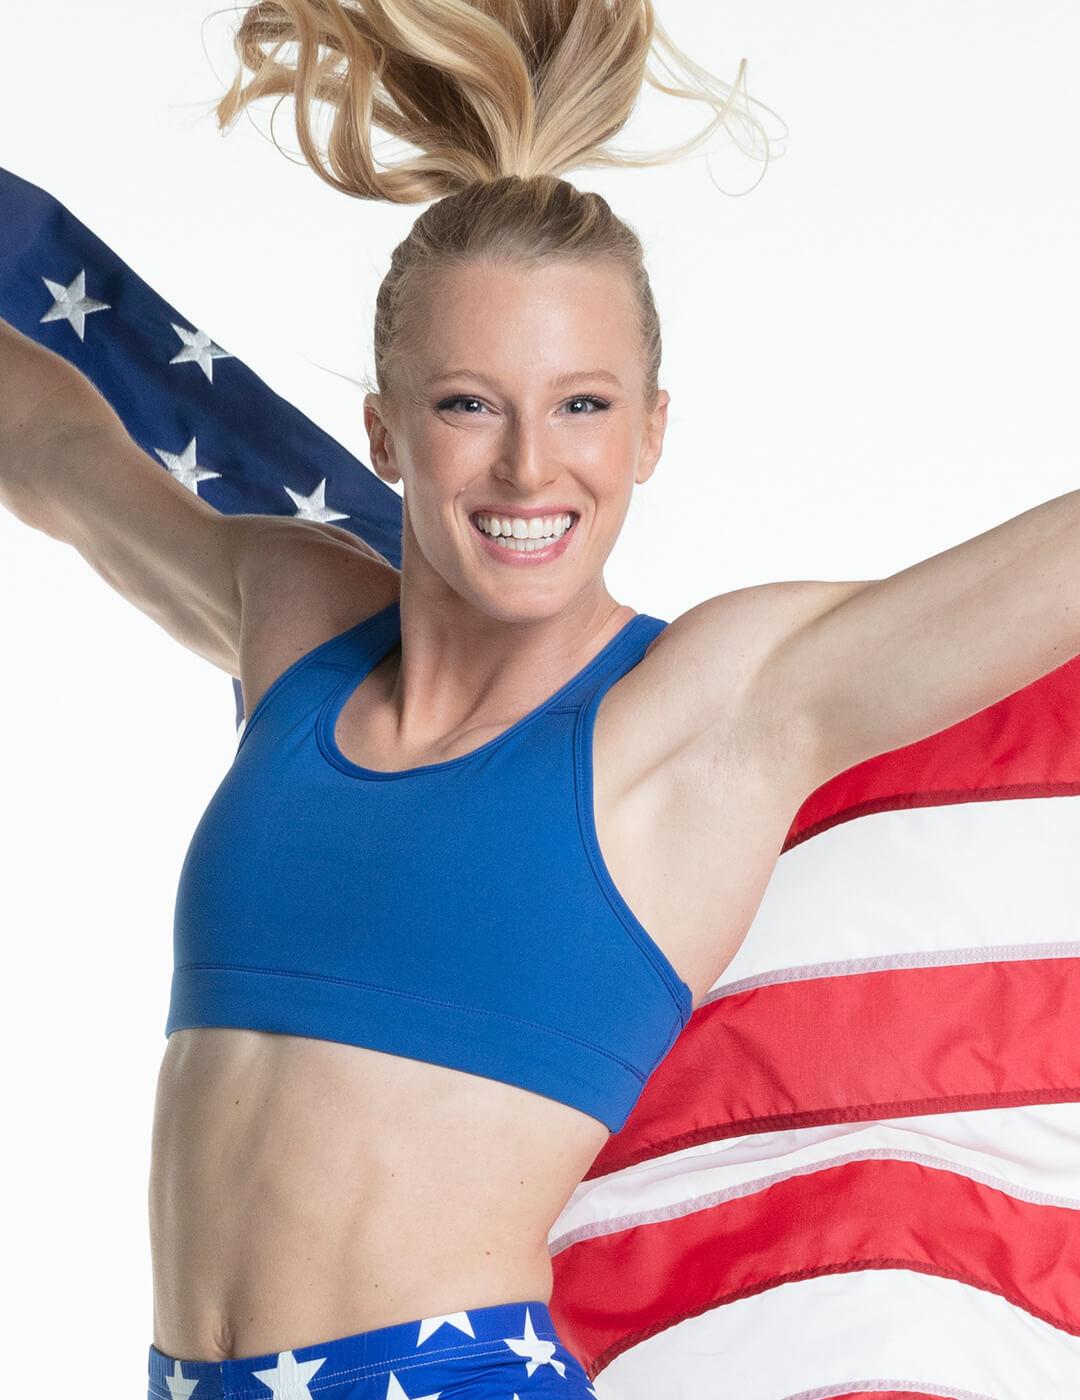 Sandi Morris smiling and holding the US flag behind her back